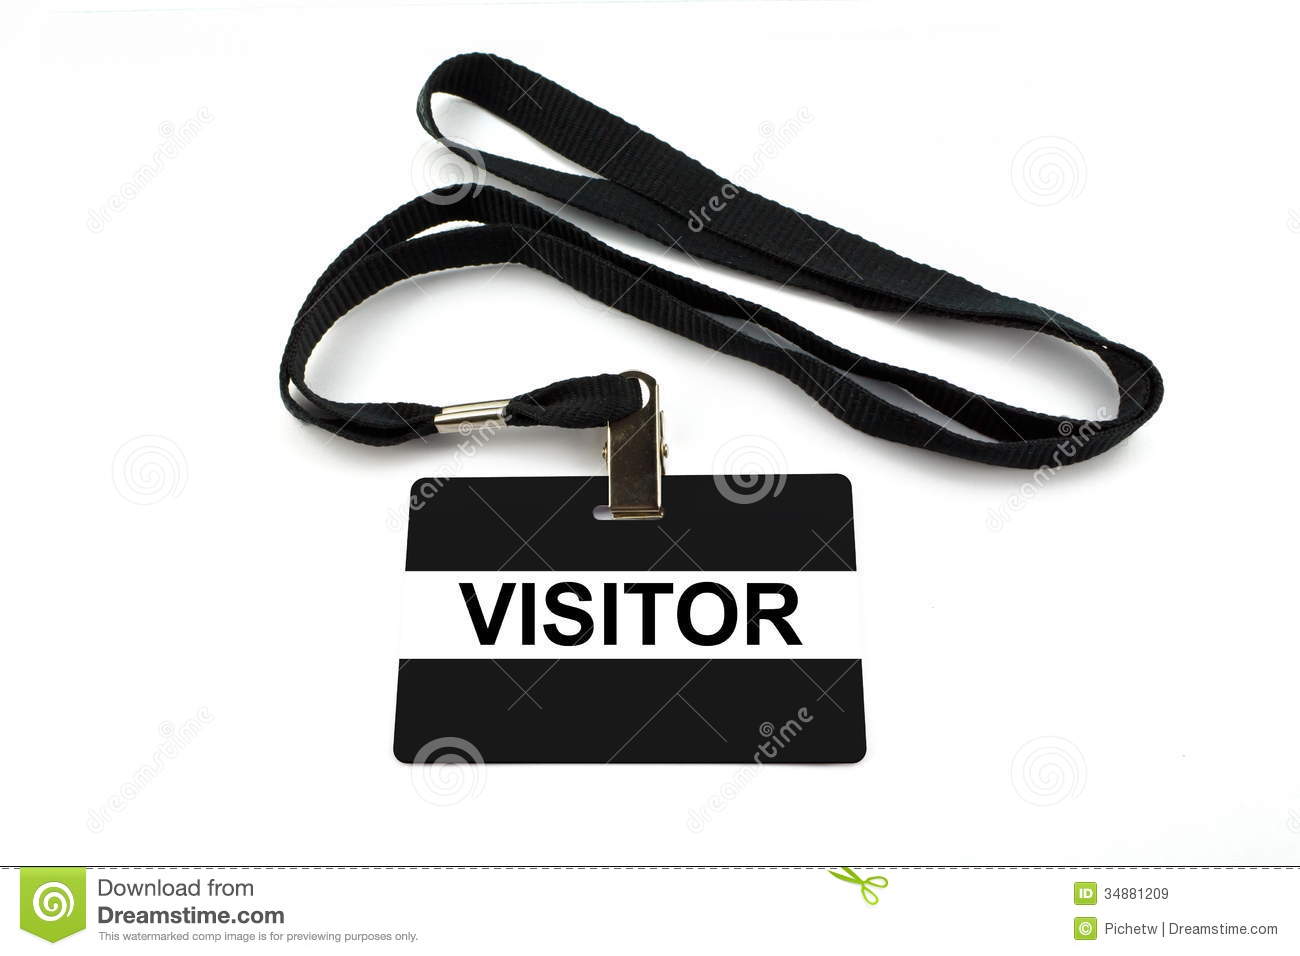 Visitor Access Badge Isolated On White Background